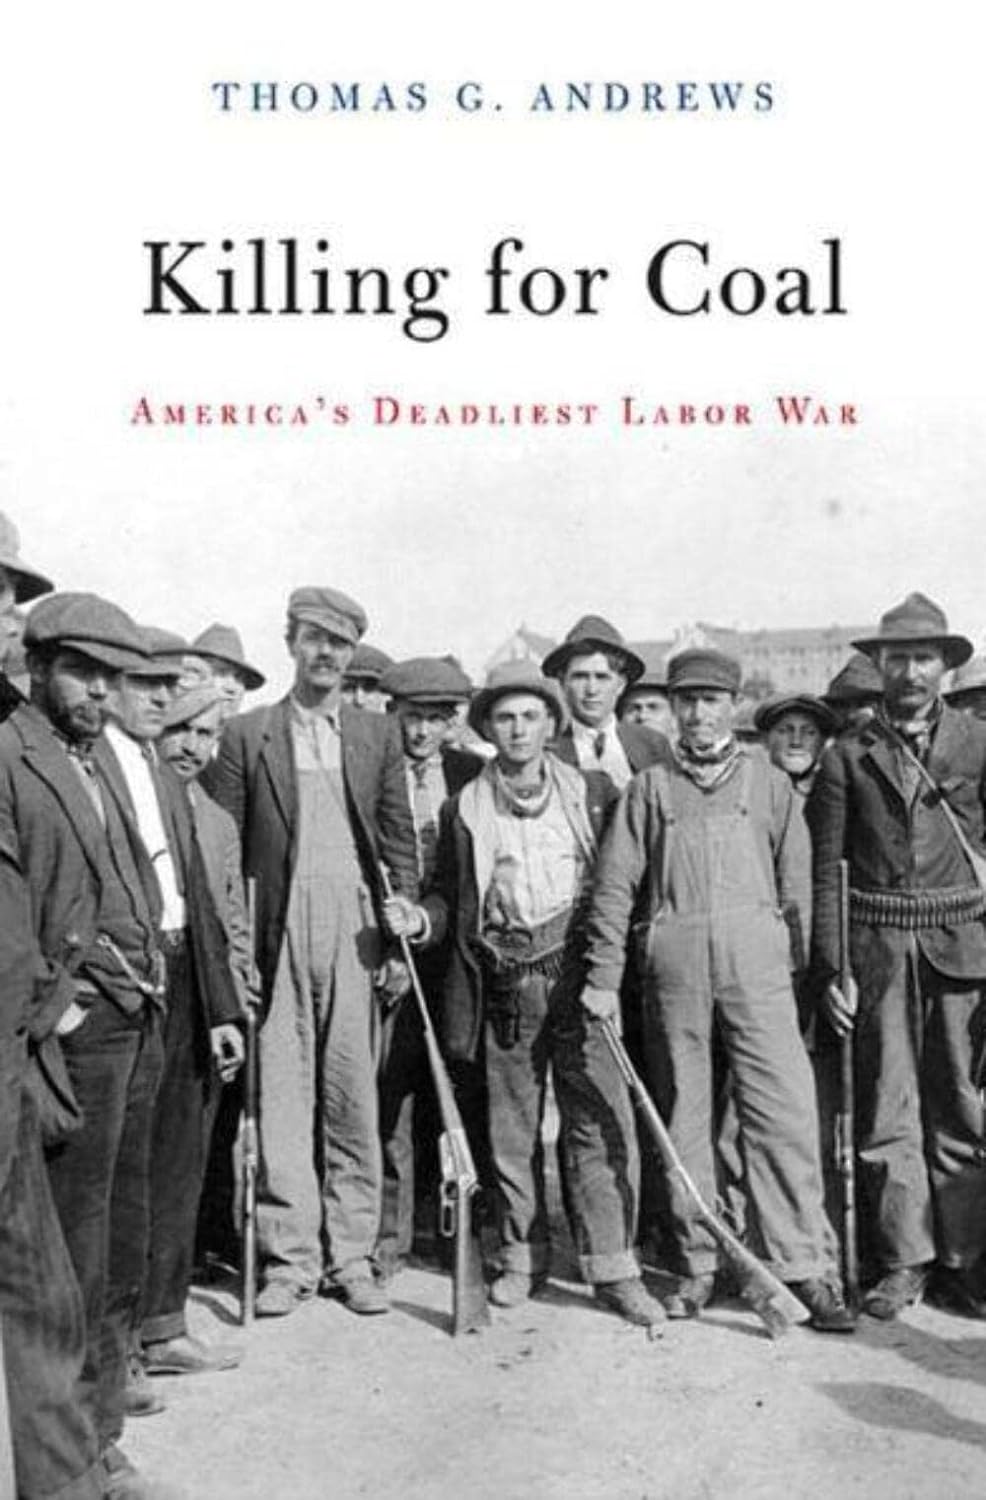 Killing for Coal: America's Deadliest Labor War. By Thomas G. Andrews.